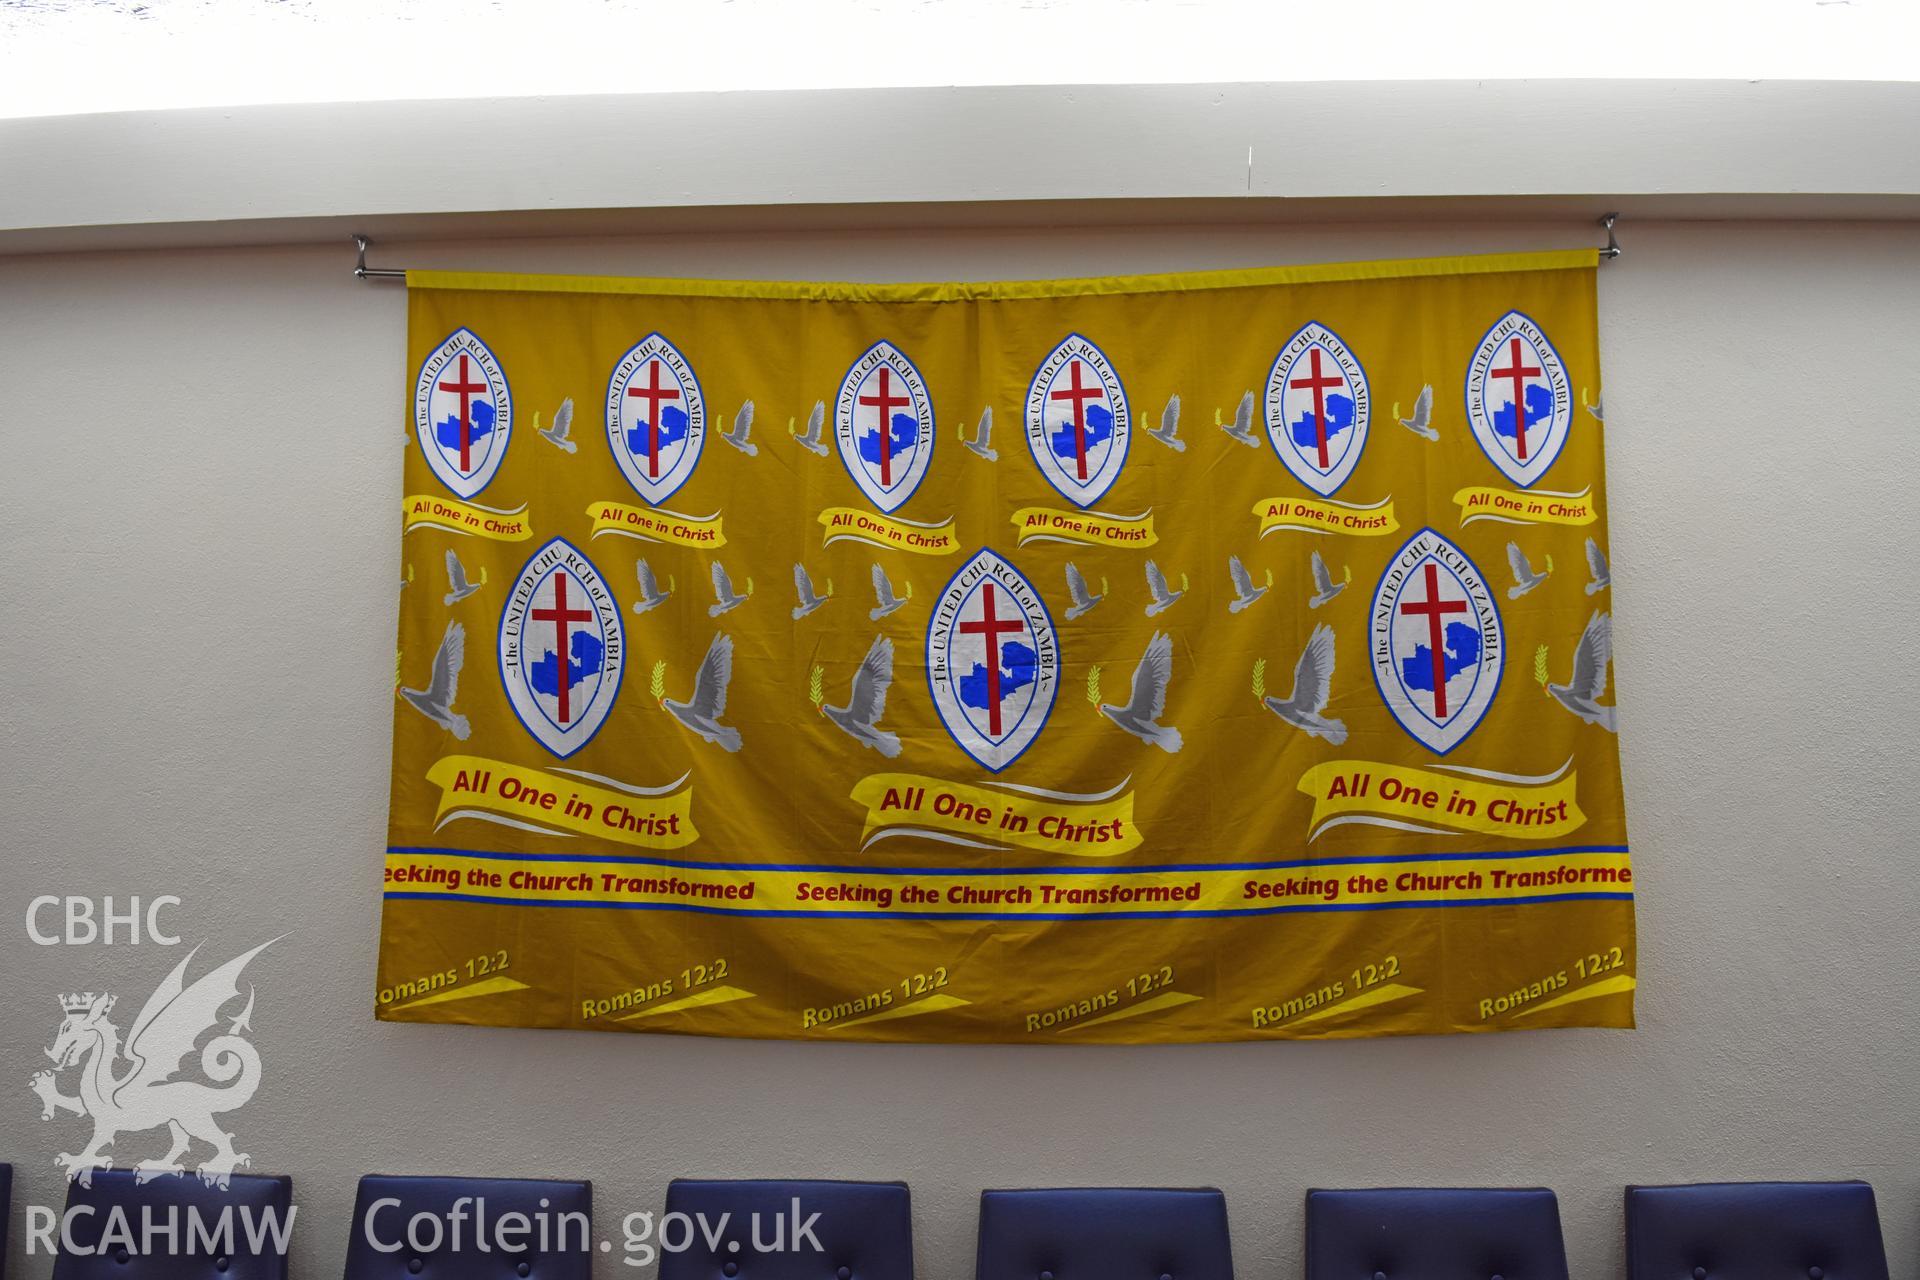 Colour photograph showing detail of banner at the English Wesleyan Methodist Chapel, Porthcawl, taken during photographic survey conducted by Sue Fielding on 12th May 2018.